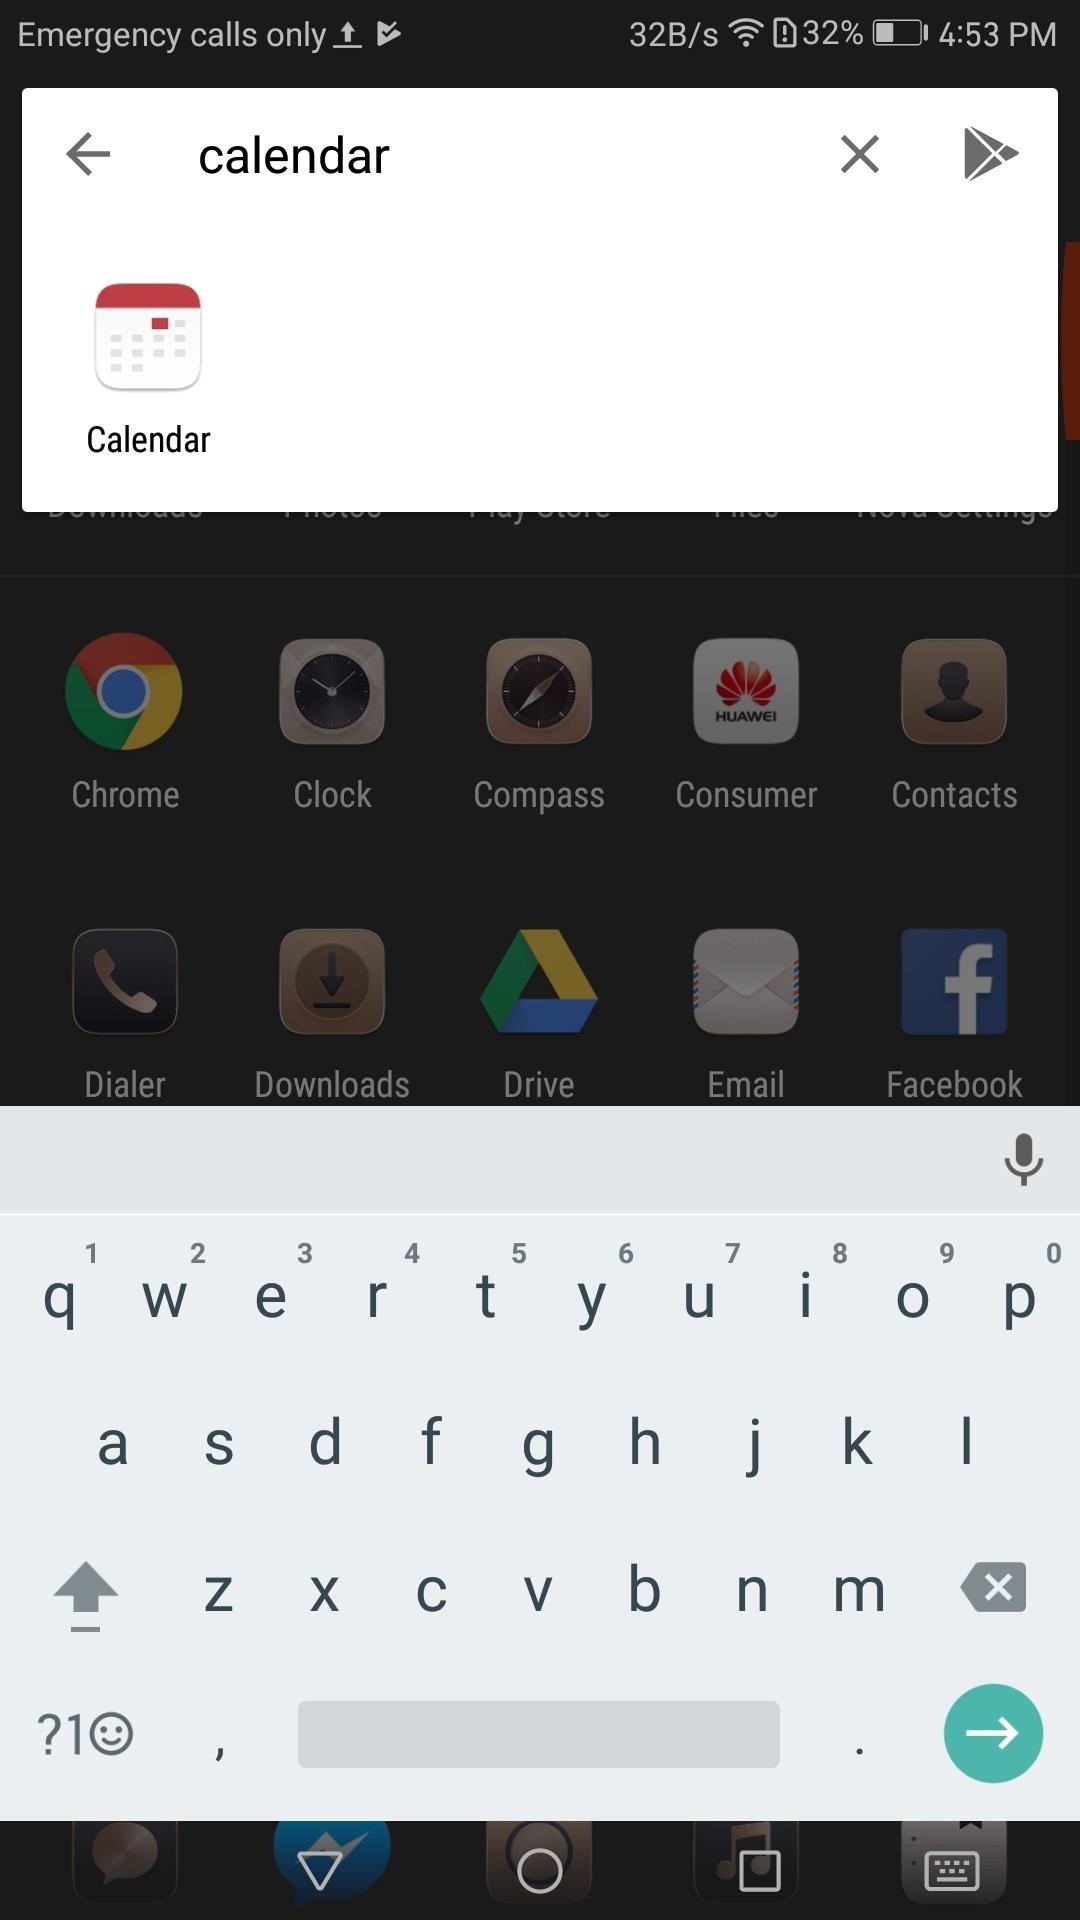 Nova Launcher 101: How to Hide Apps to Remove Icons & Free Up Space in Your App Drawer